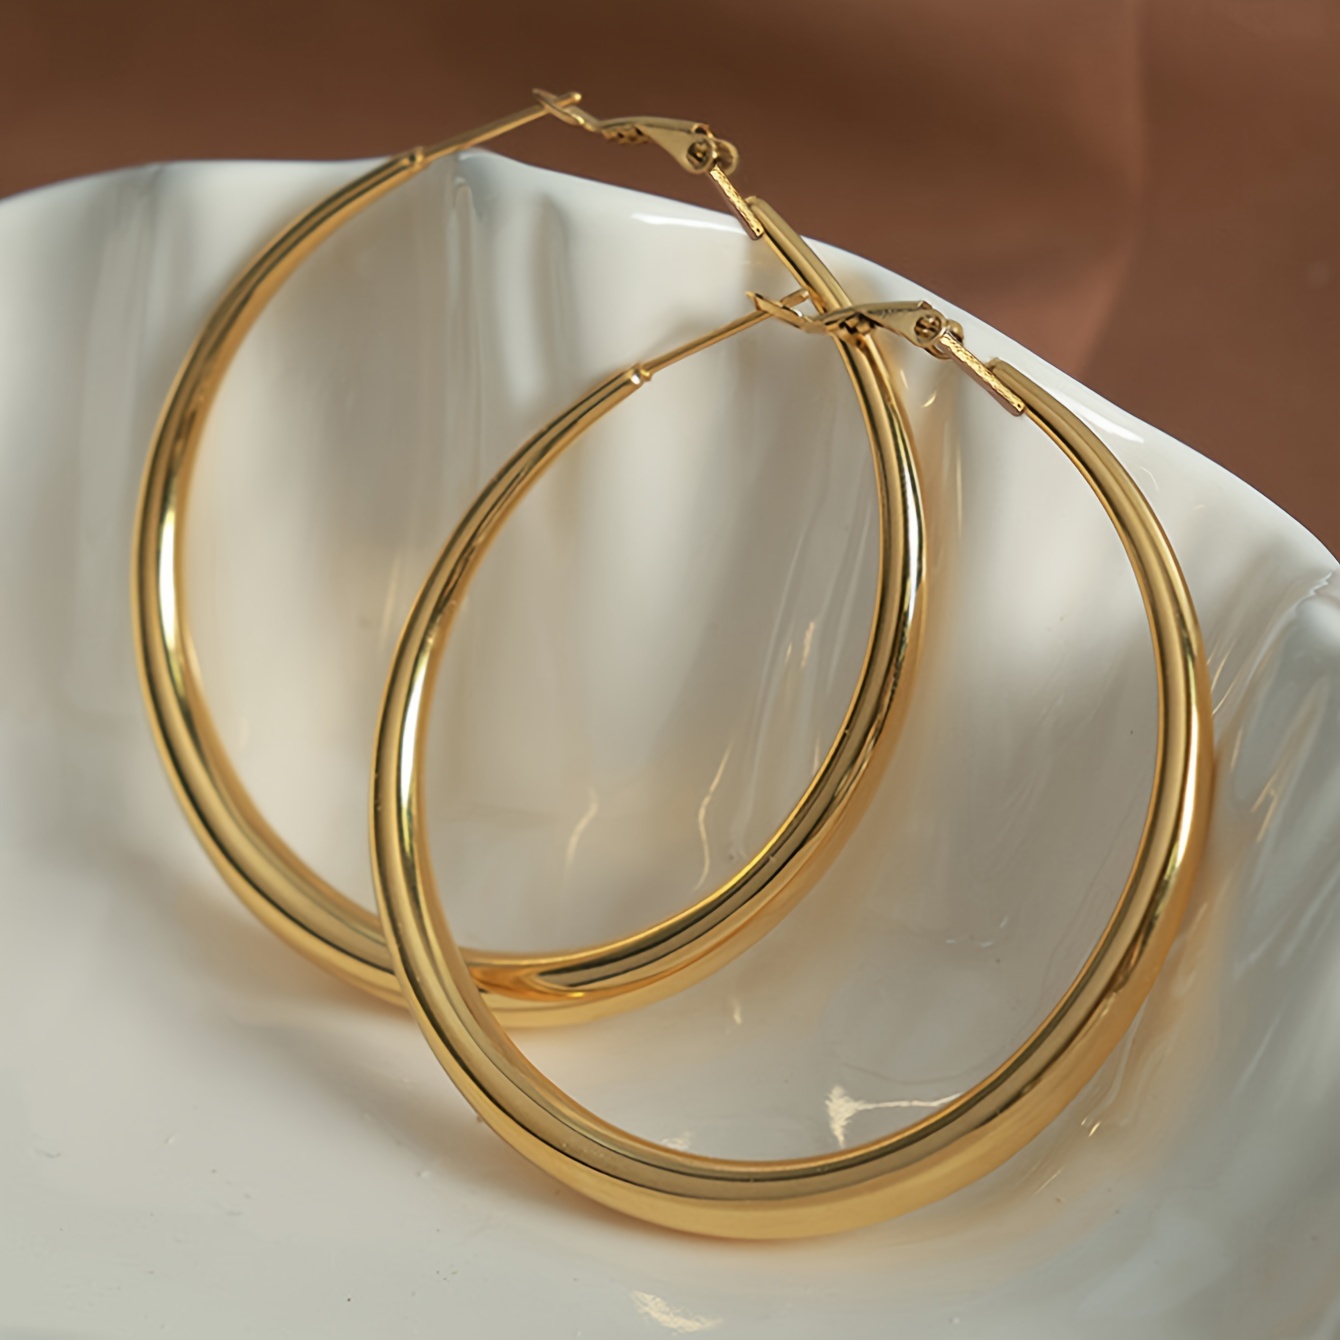 

Smooth Large Golden Circle Design Hoop Earrings Iron Jewelry Vintage Sexy Style For Women Summer Party Earrings